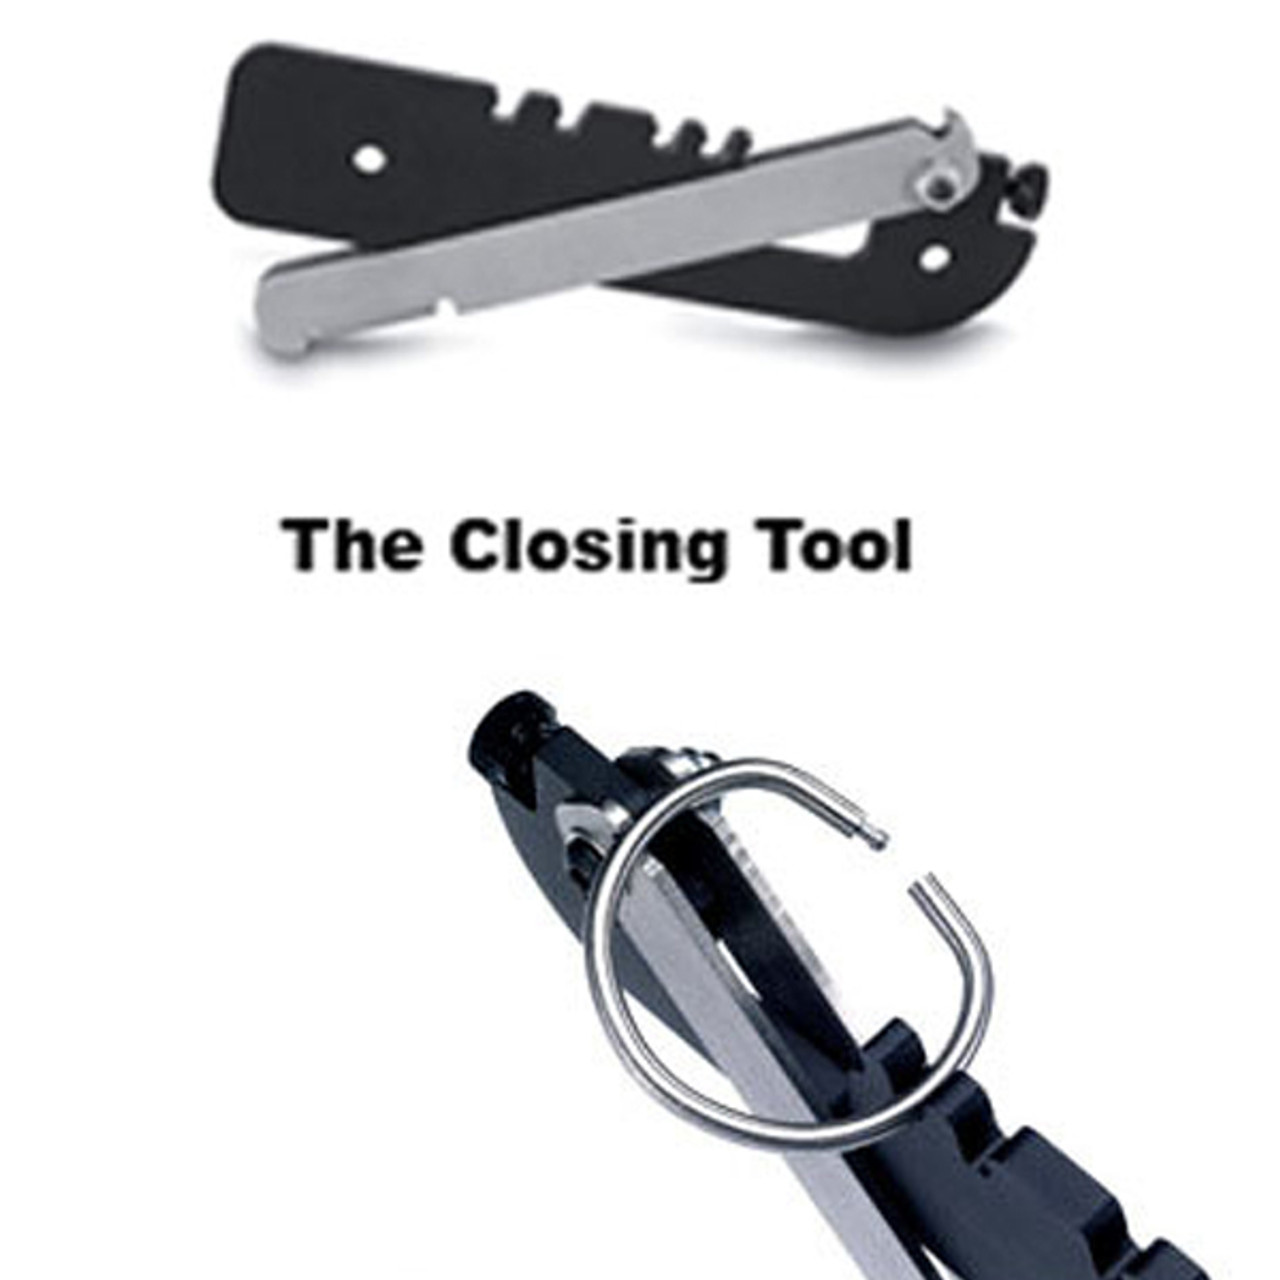 Shop for and Buy Tamper Proof Key Ring Cutting Tool at